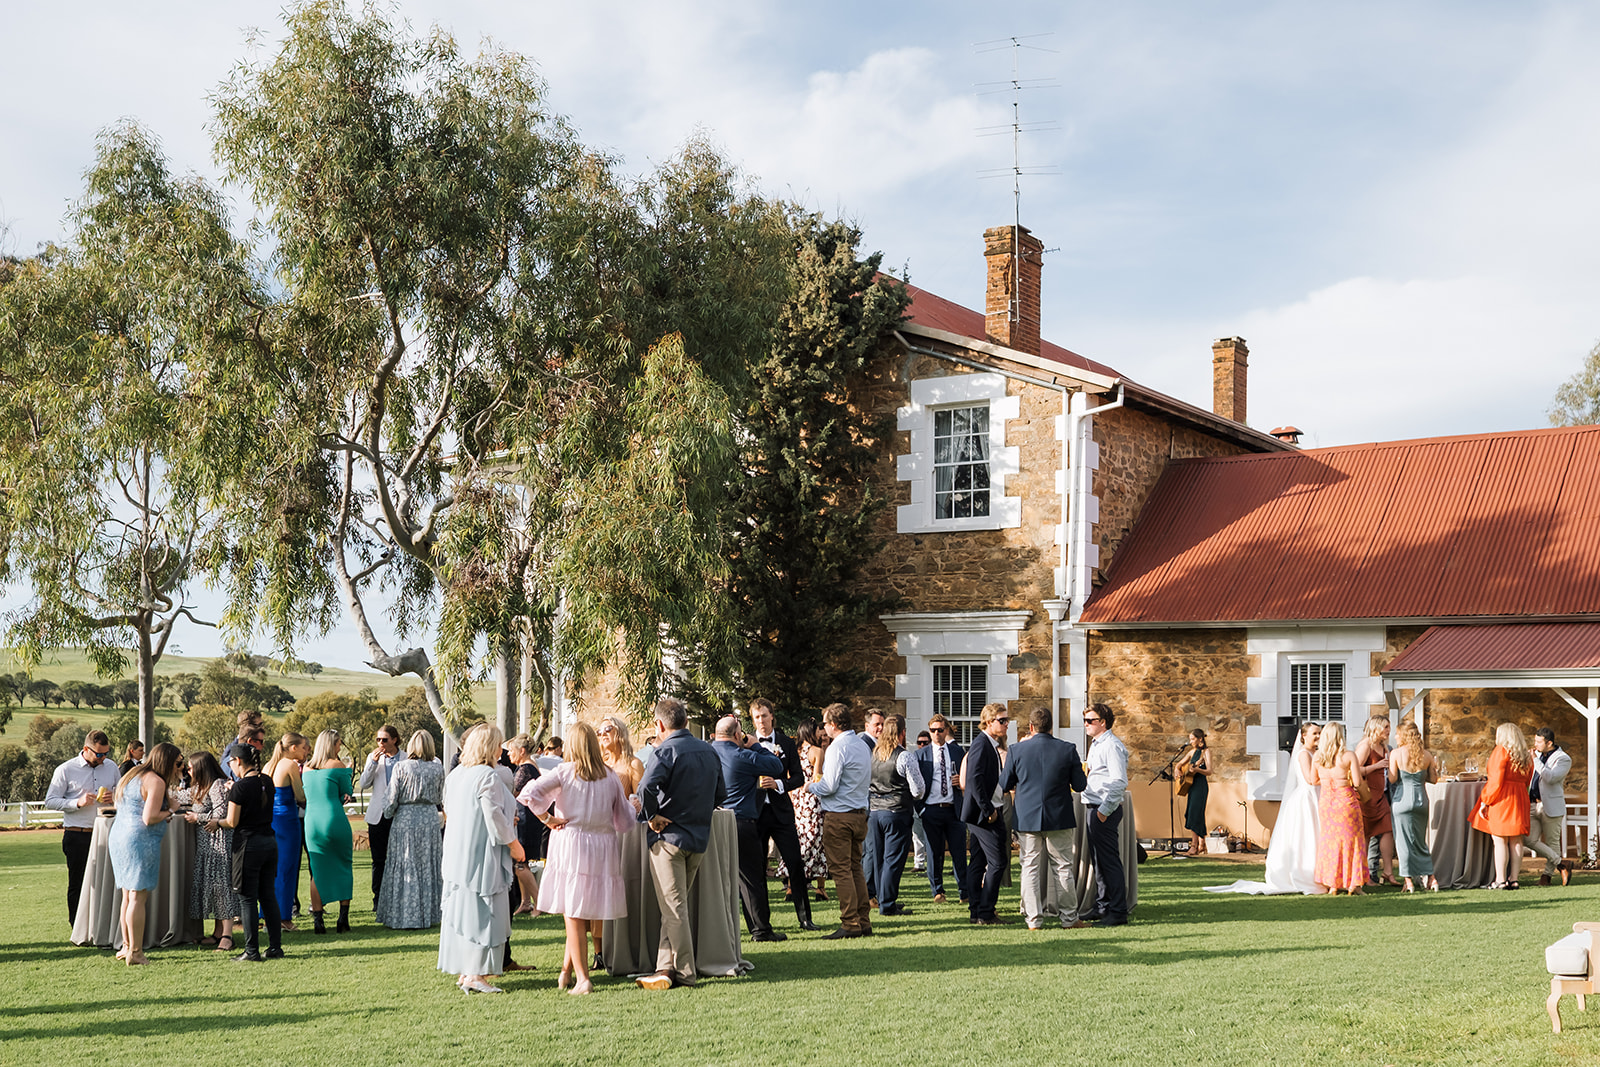 Buckland Estate wedding on the lawns